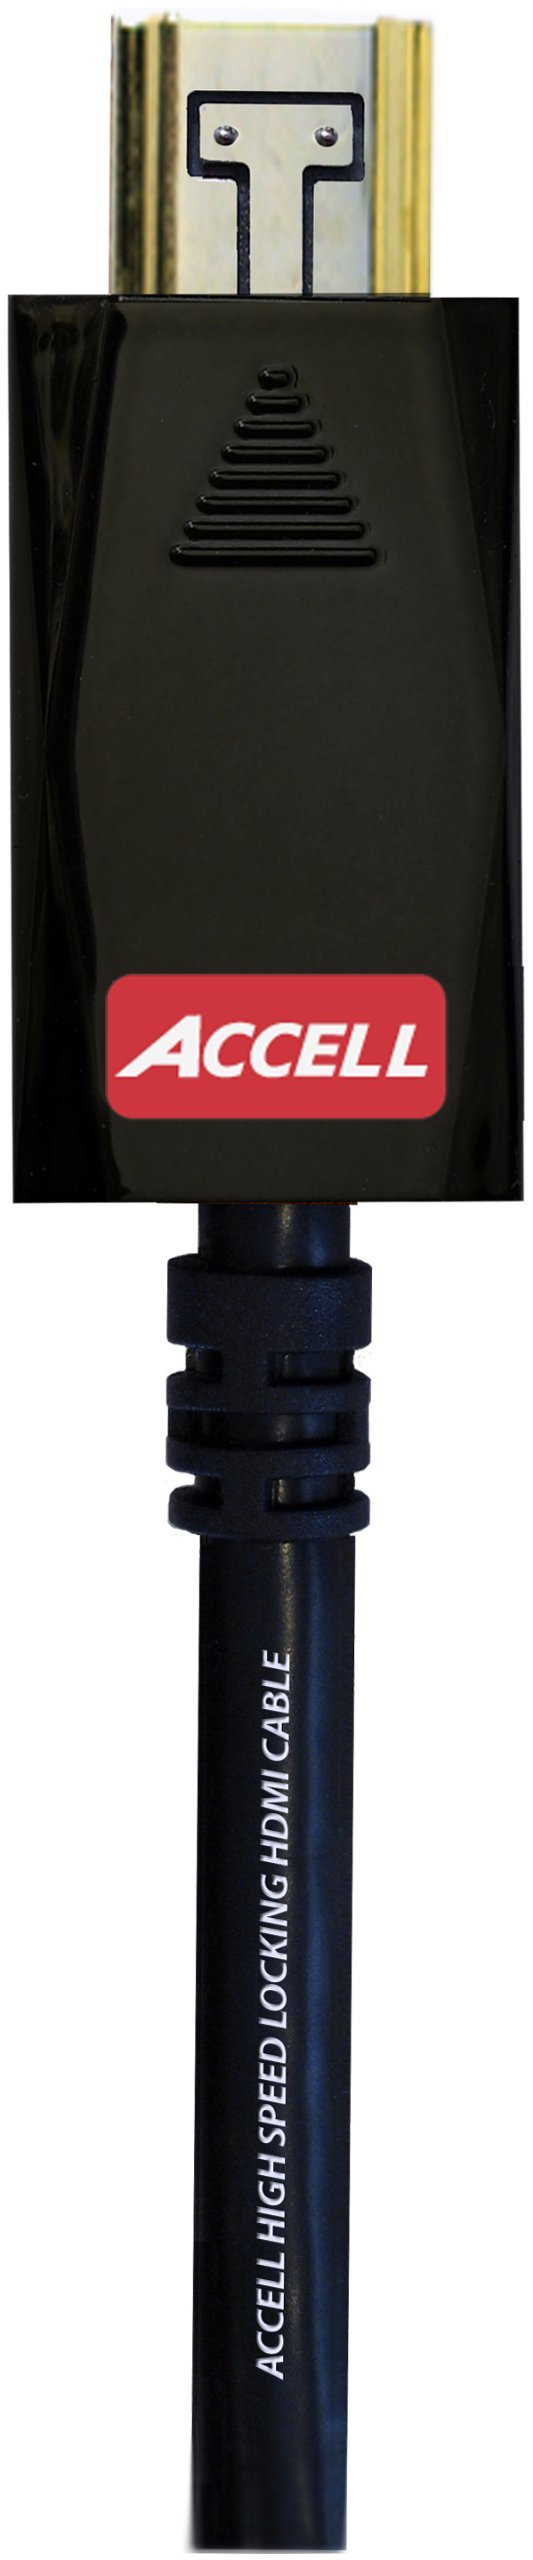 Accell Avgrip Pro HDMI Cable - High Speed HDMI Cable with Locking Connectors - 1 Foot, HDMI 2.0 Compliant for 4K UHD @60Hz - Polybag, Black (B104C-001B-40) 1 Foot (0.3 Meters) Poly Bag Packaging - LeoForward Australia